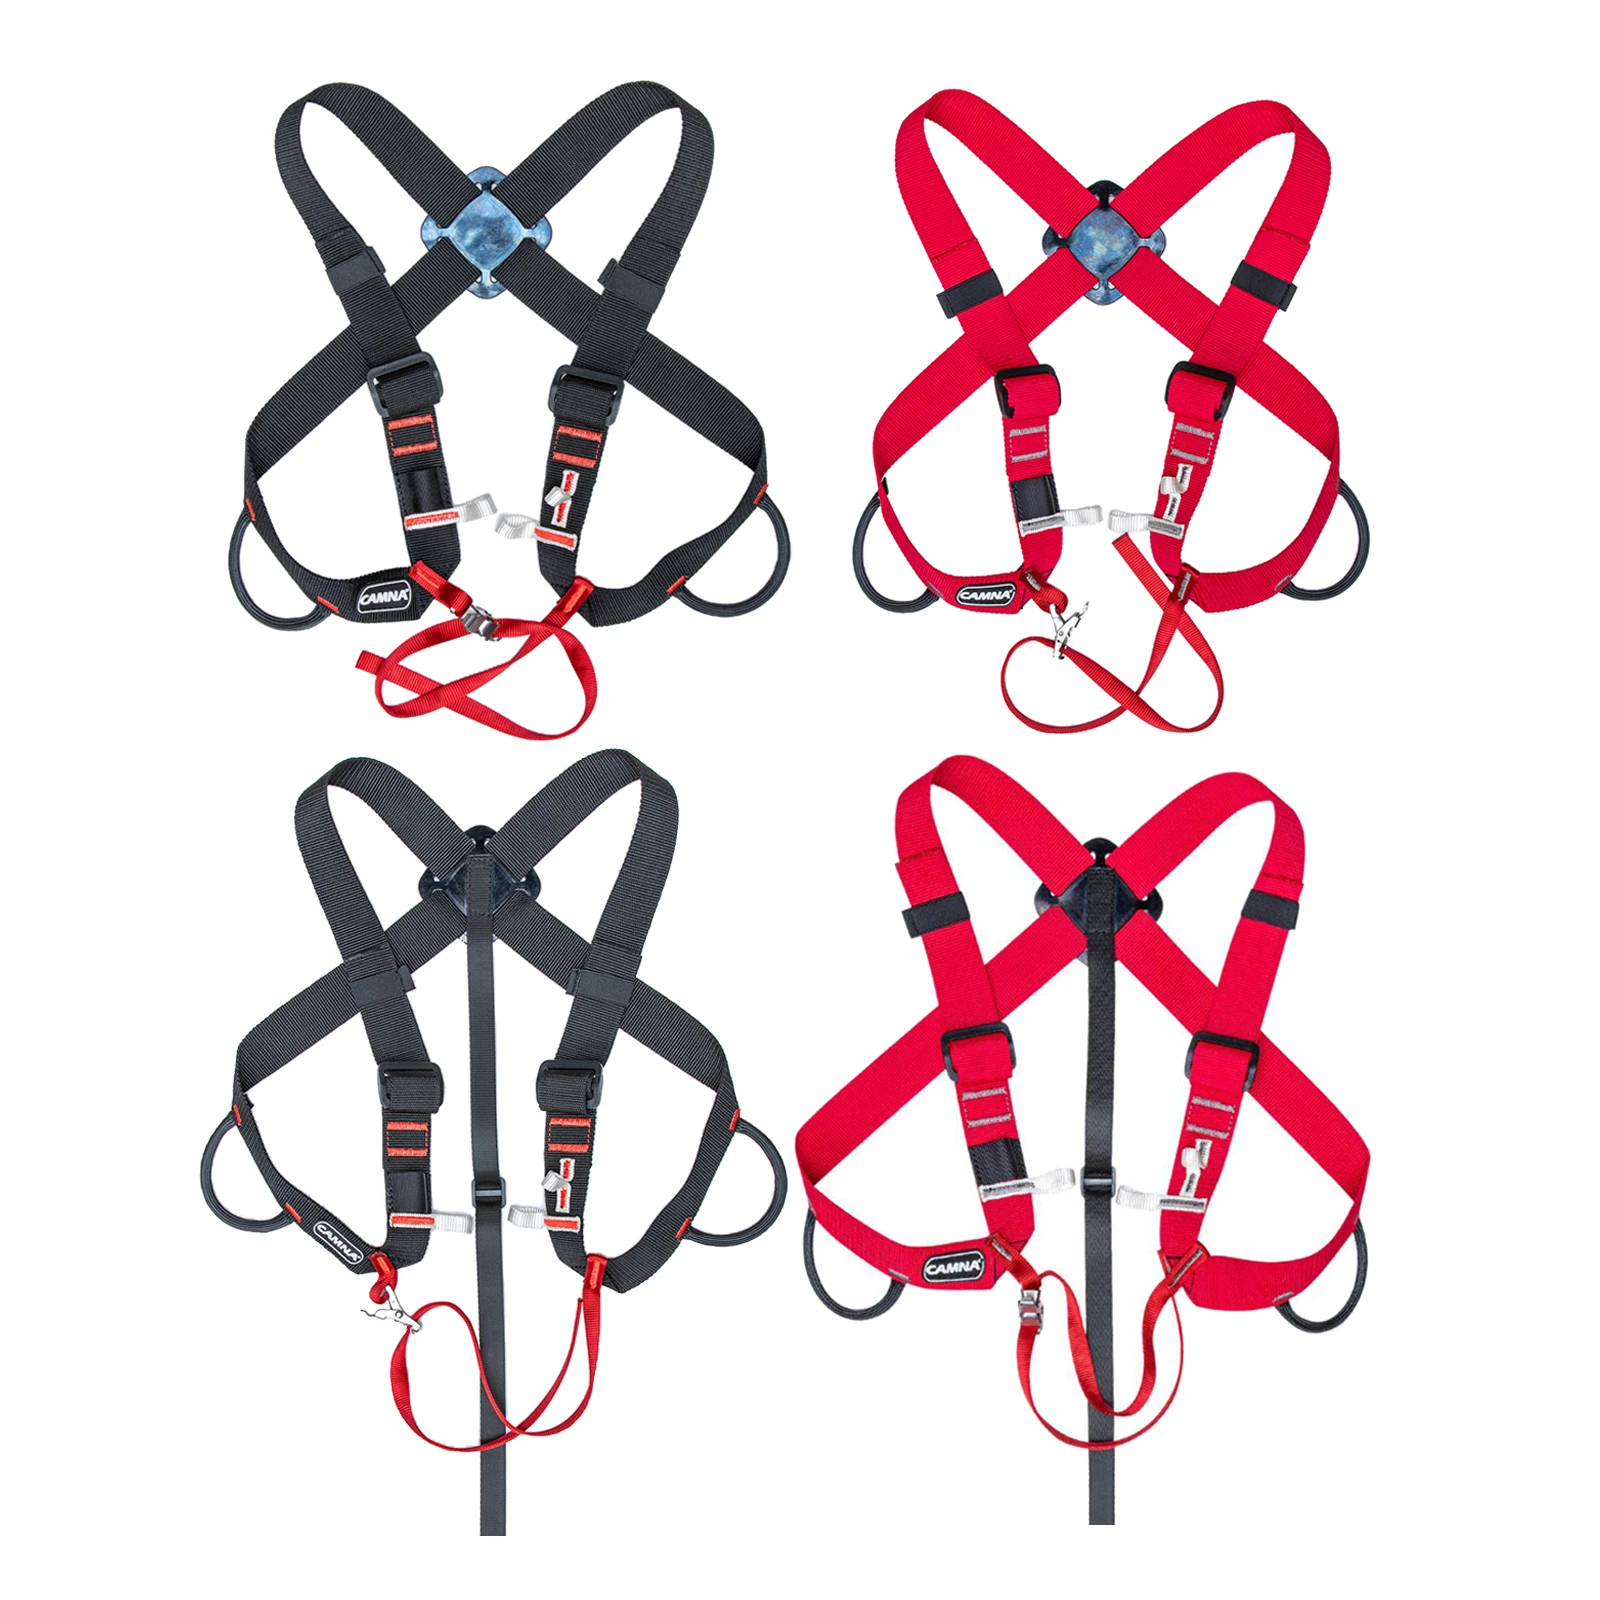 Rock Climb Safety Harness Ascending Protection Girdles Fixed Belt Caving